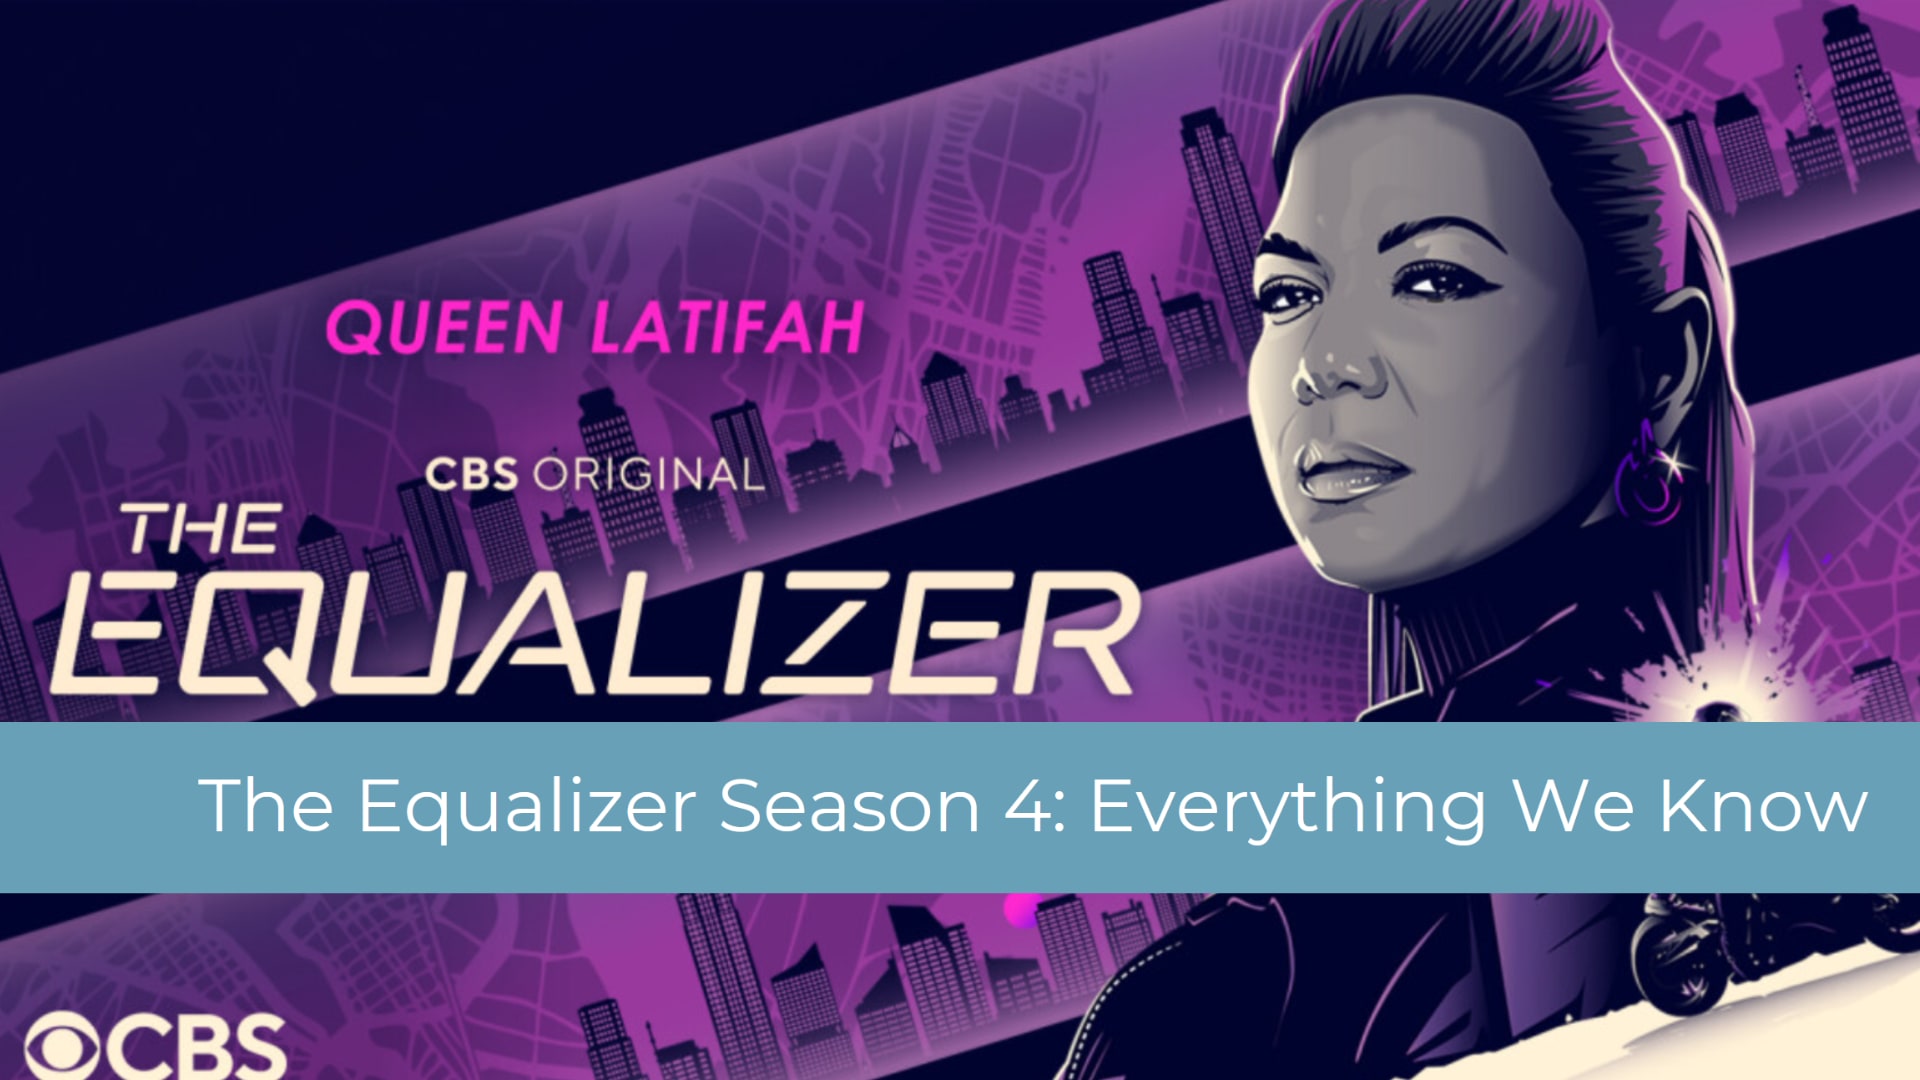 The Equalizer on CBS